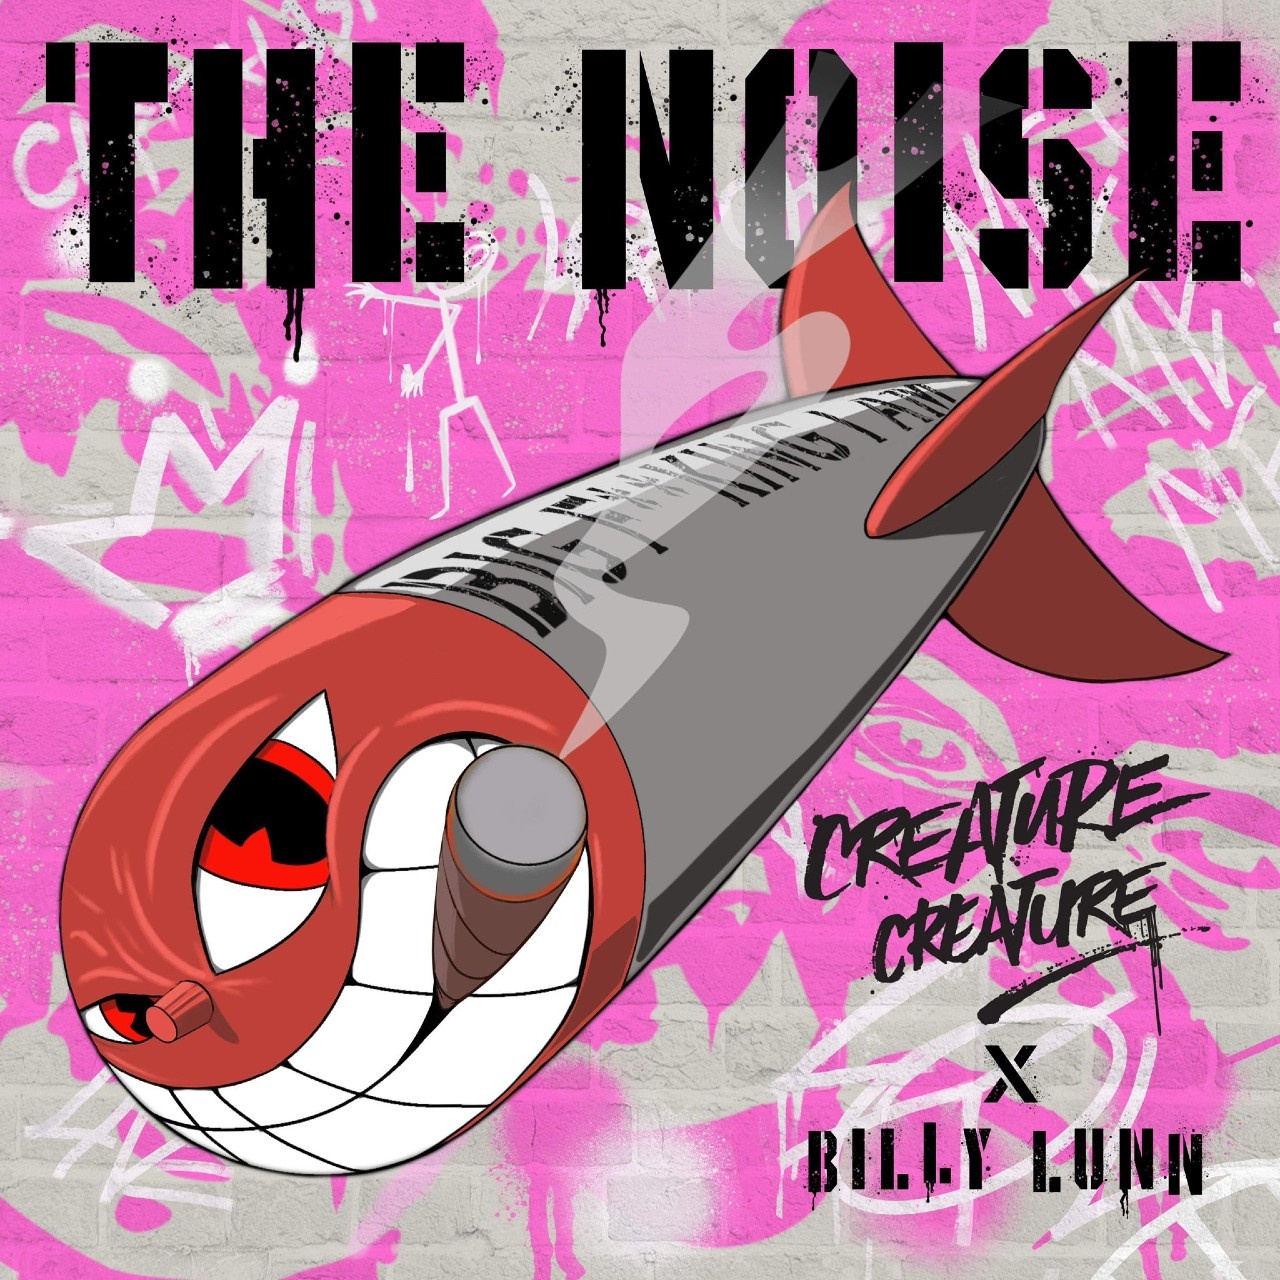 HOT TRACK: “The Noise” by Creature Creature featuring Billy Lunn